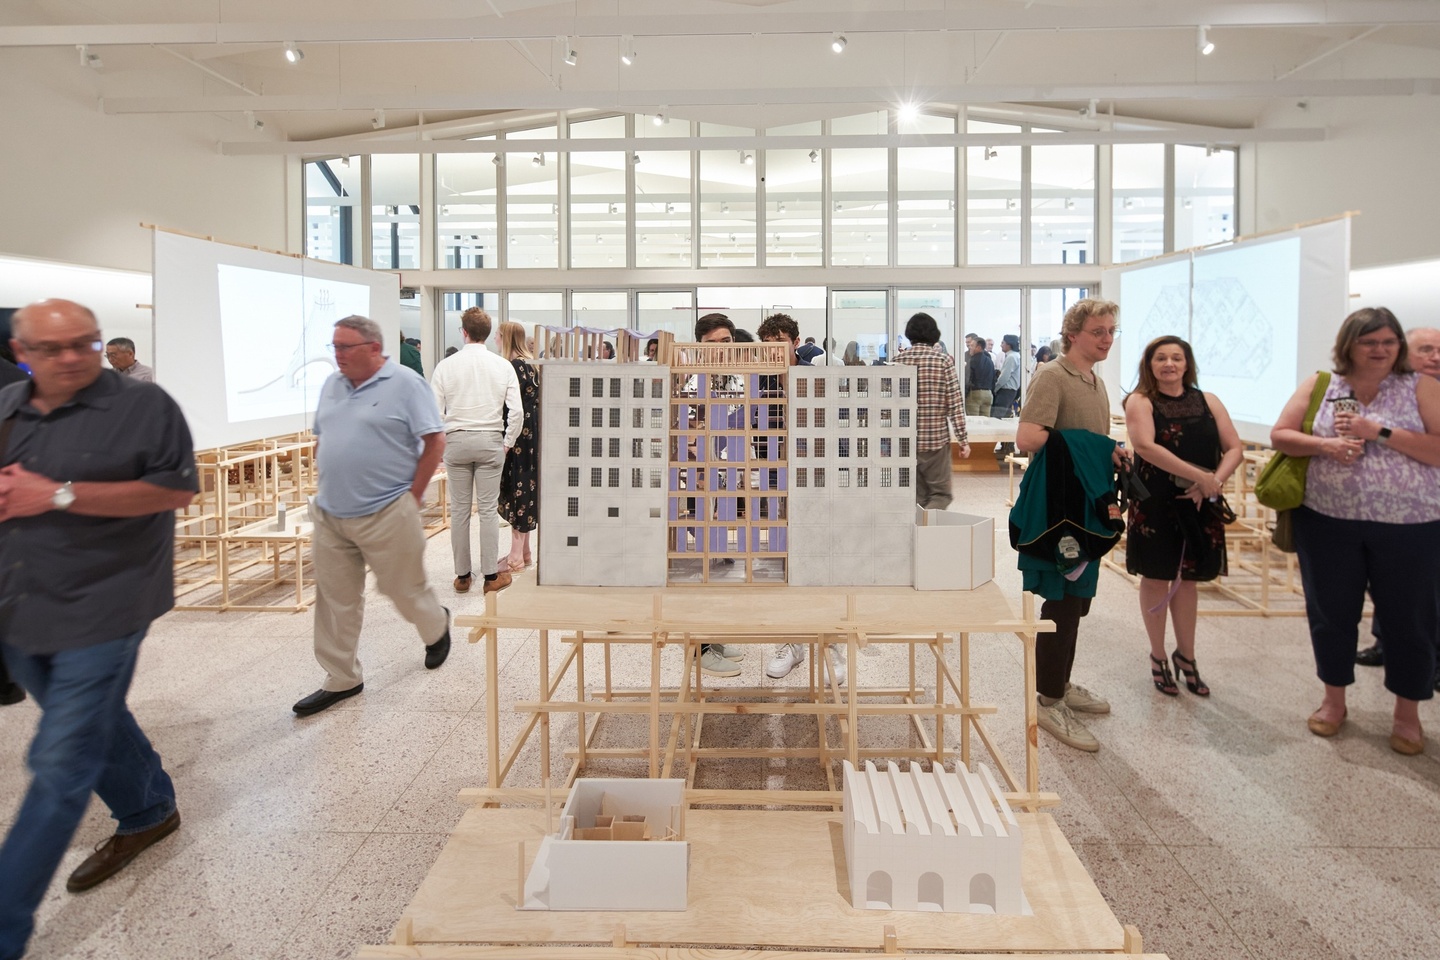 Gallery space with a row of architectural models displayed along the center aisle, and two freestanding banks of projector screens flaking the sides, displaying architectural renderings. Attendees walk through the space.